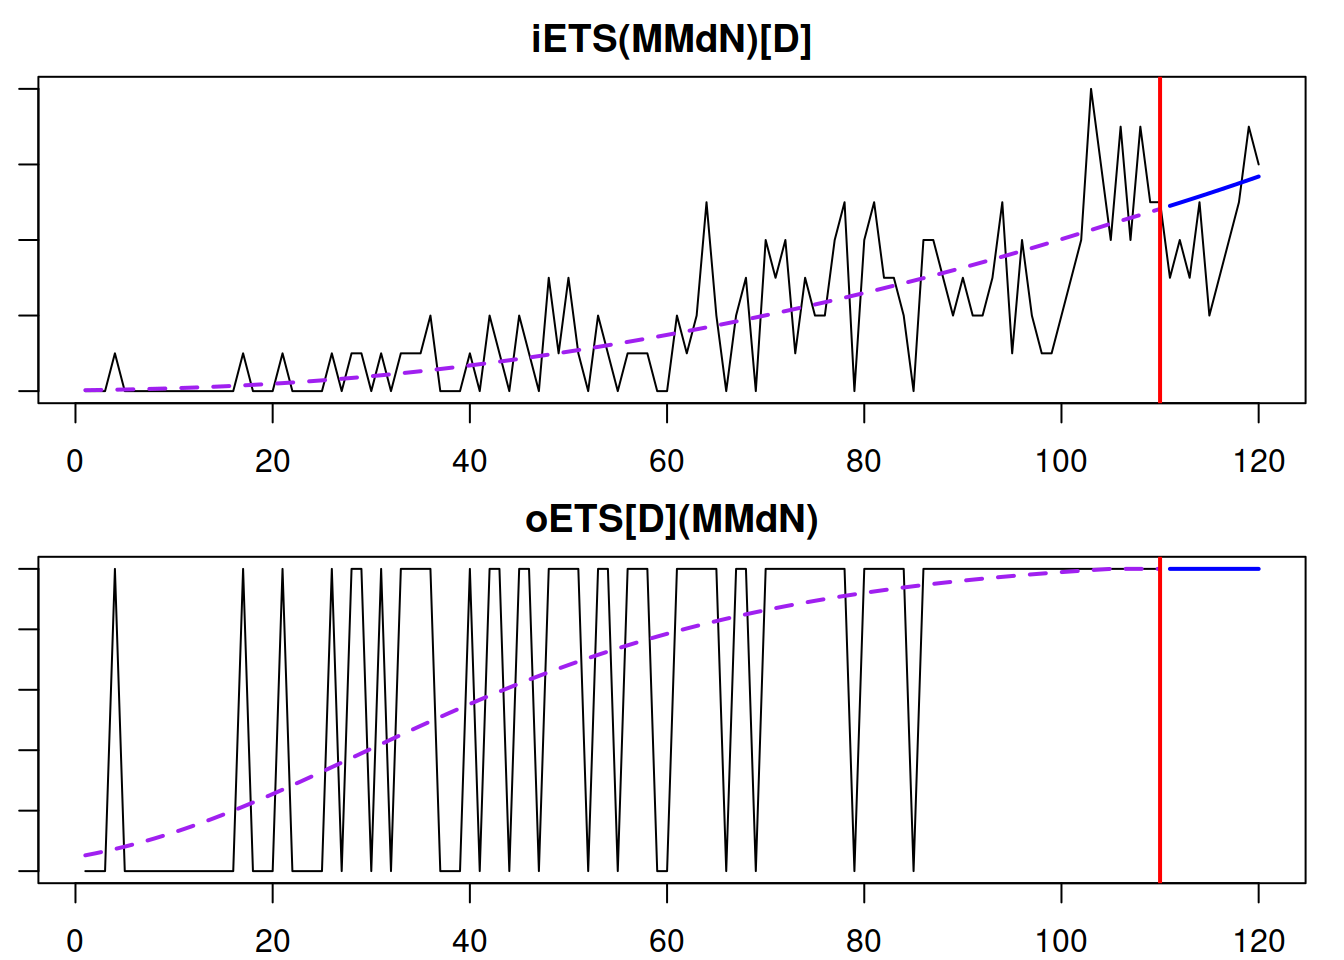 The fit of the best model to the intermittent data: final demand and the demand occurrence parts.